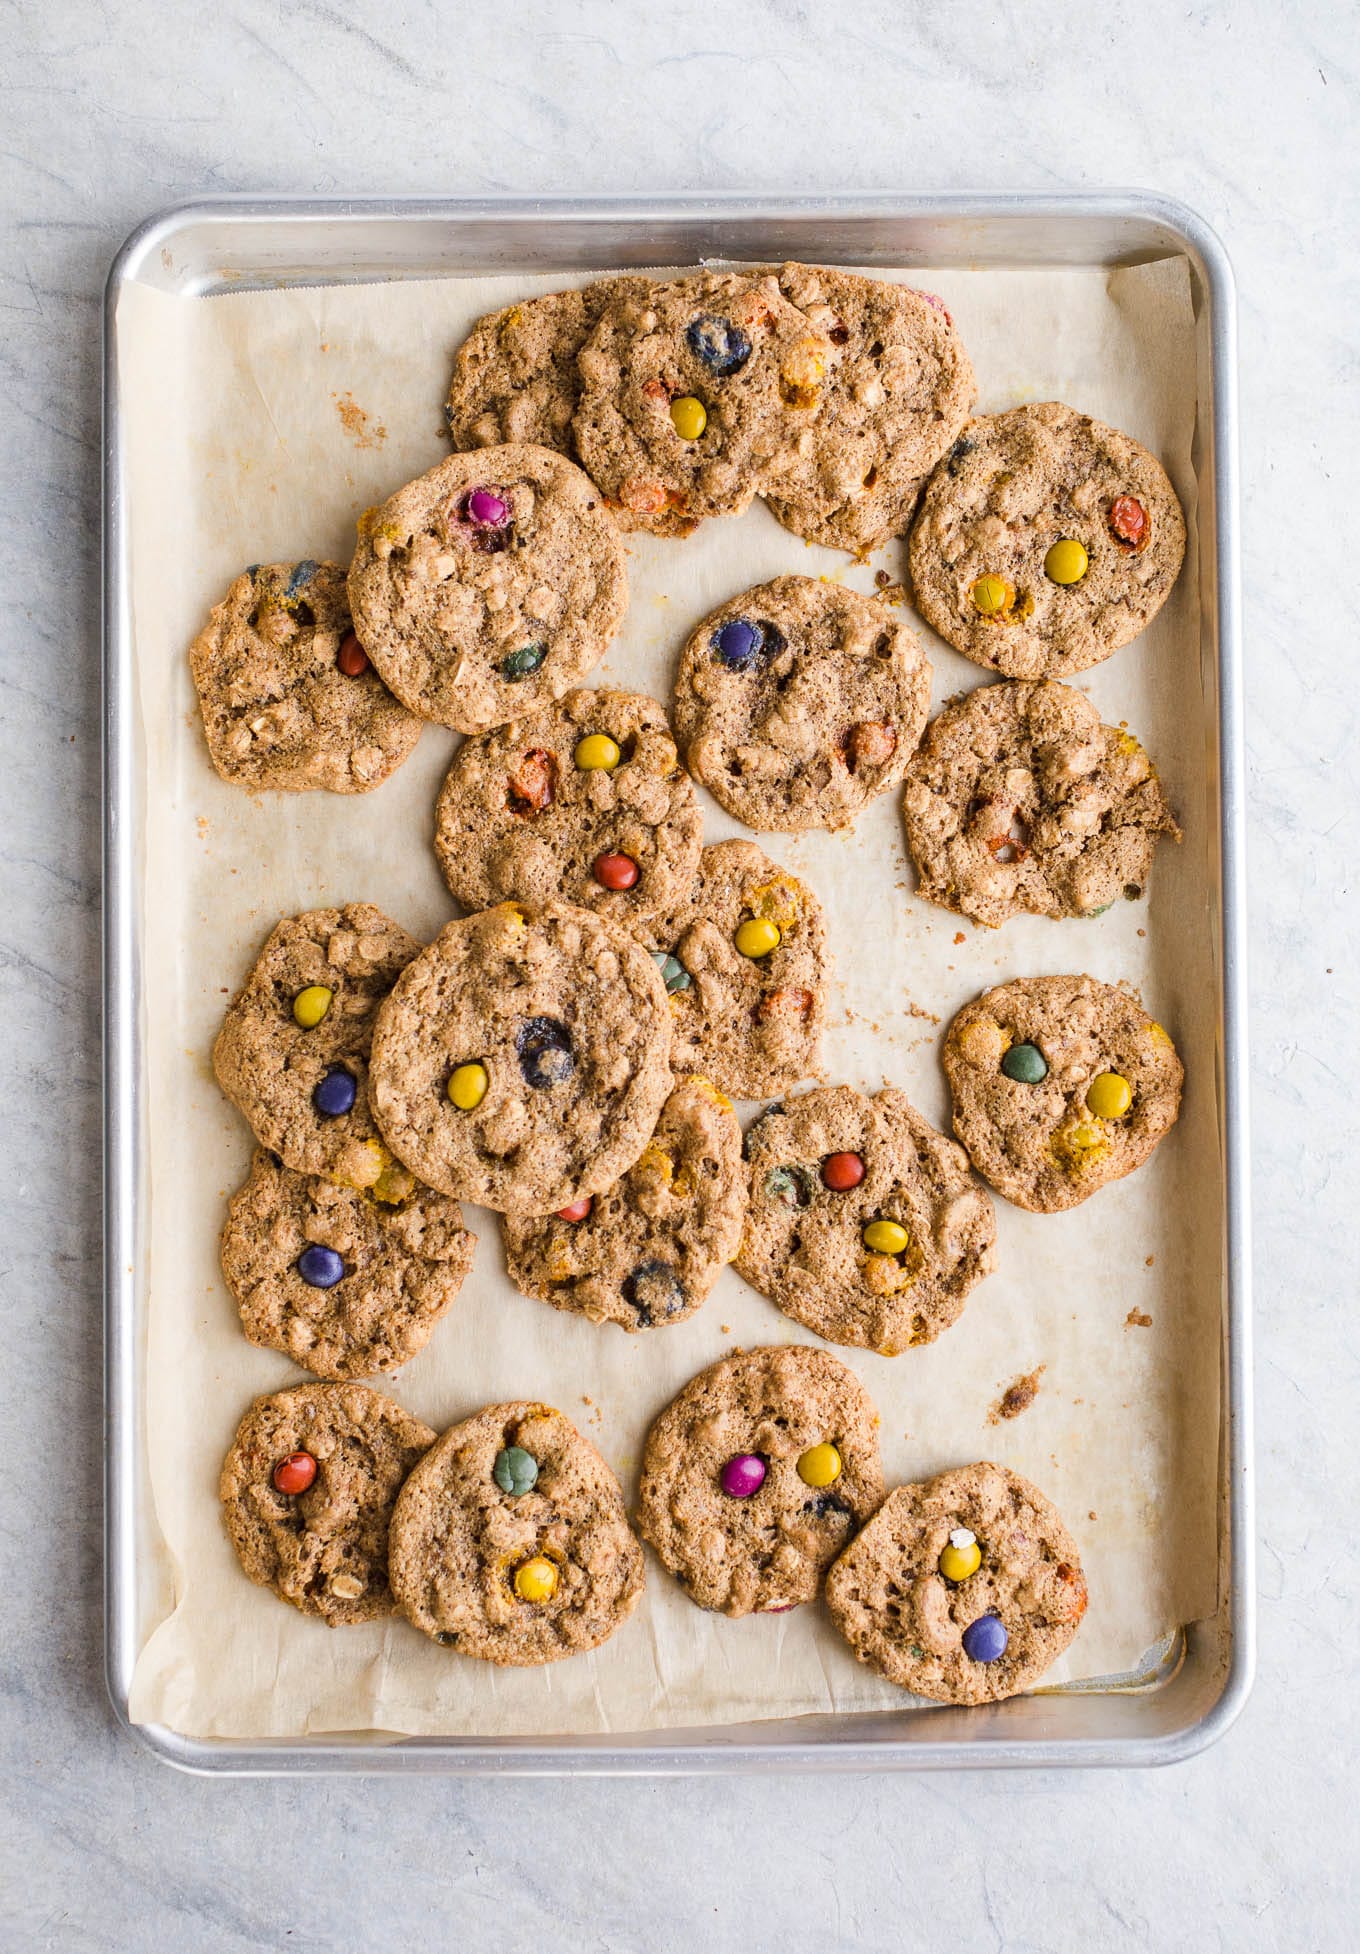 Almond Butter Monster Cookies made with gluten-free oats, pretzels, and chocolate pieces for a protein-packed gluten-free cookie. Vegan.